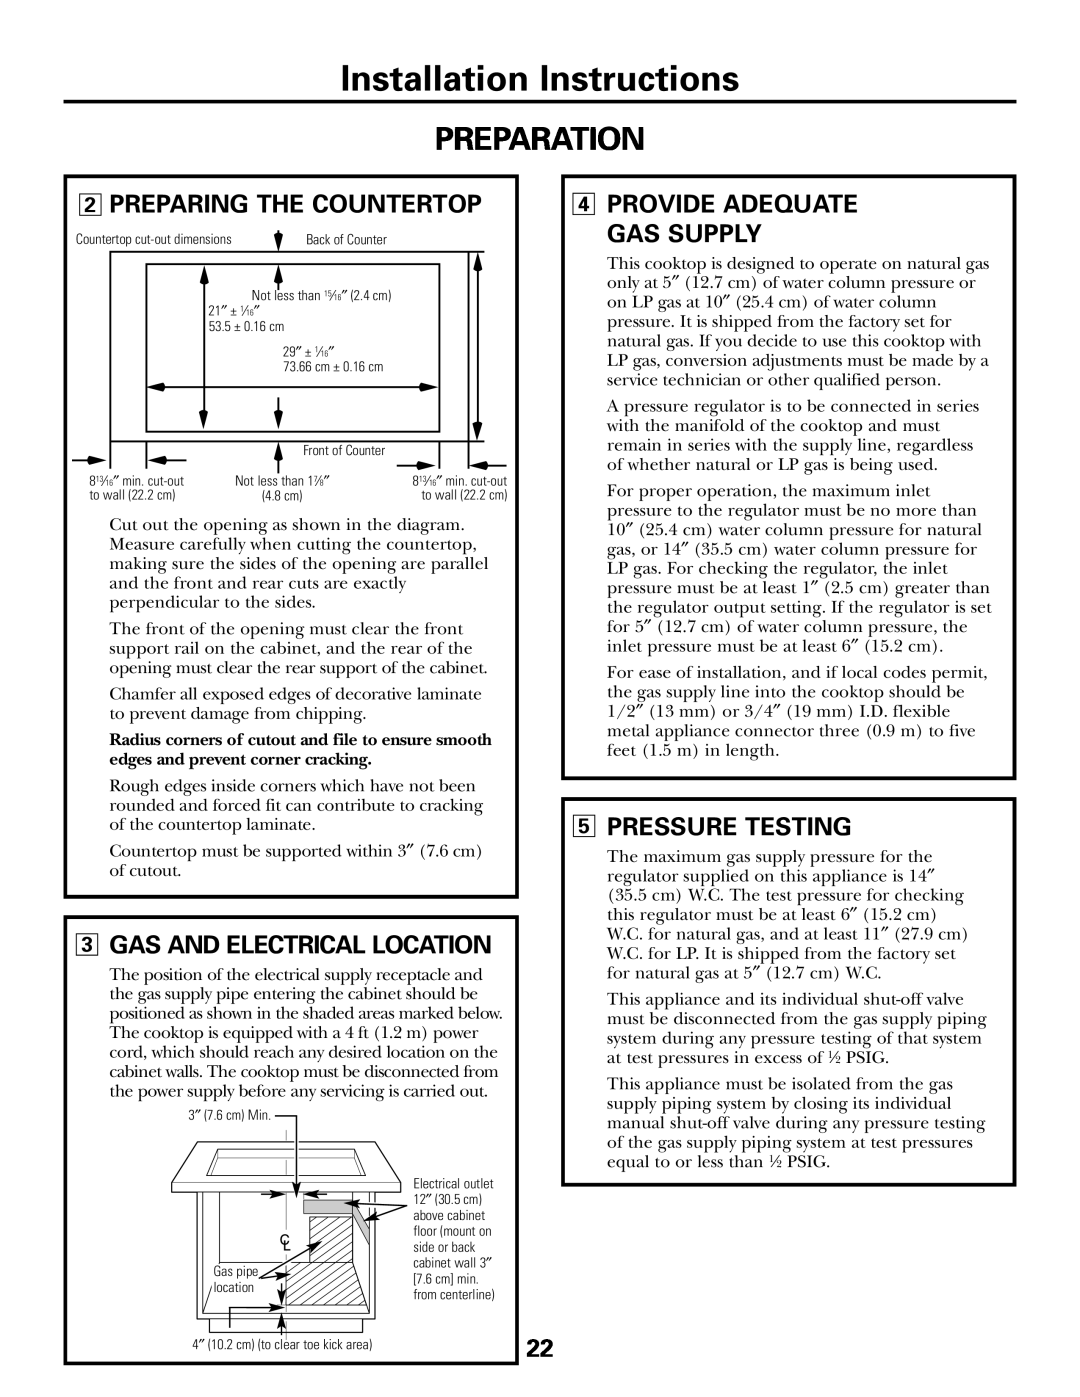 GE JGP985 owner manual Installation Instructions, Preparation, 2PREPARING THE COUNTERTOP, 3GAS AND ELECTRICAL LOCATION 